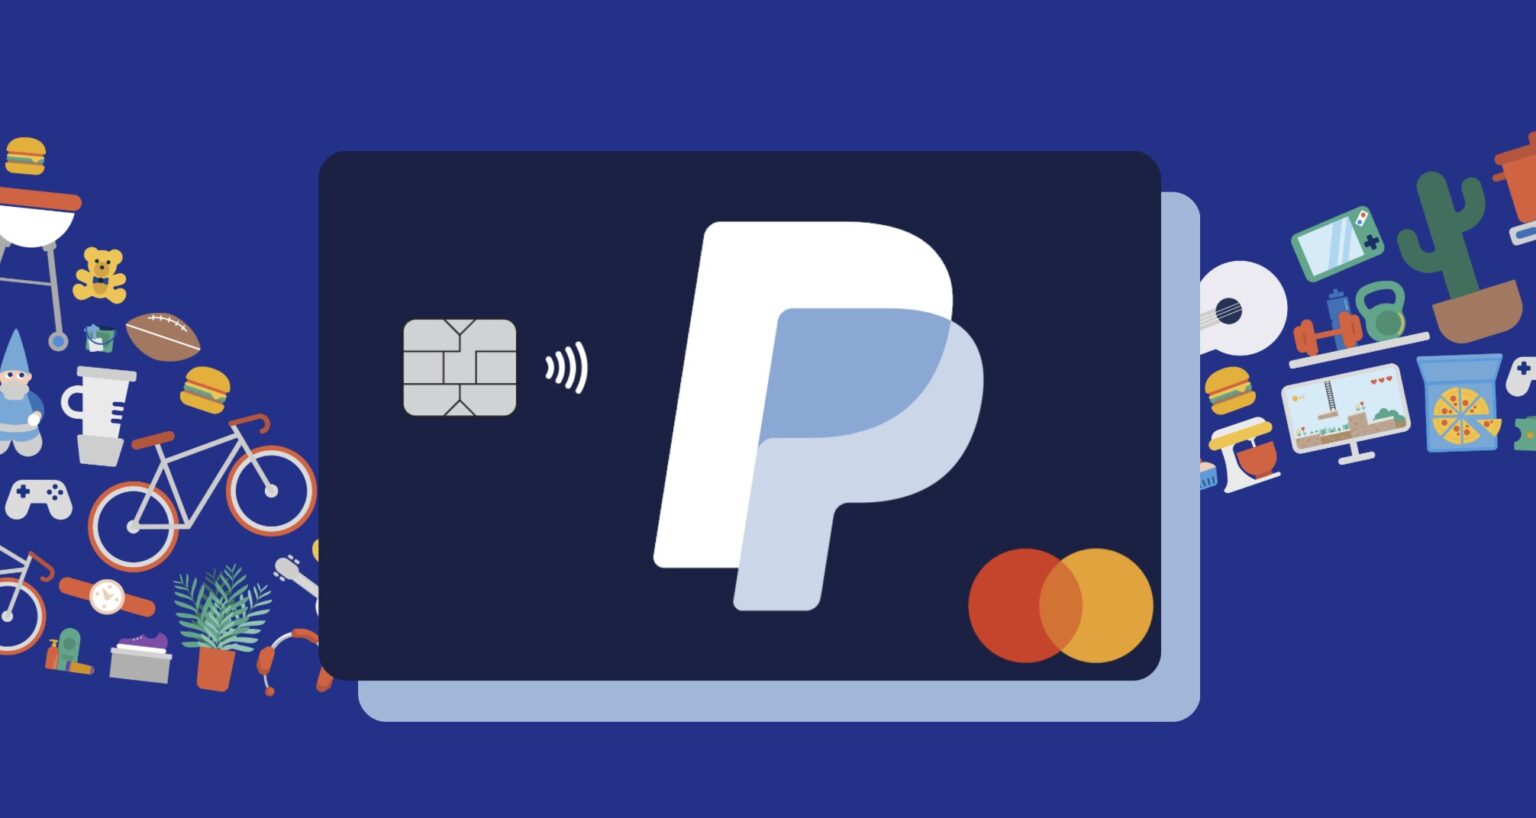 PayPal integrates with Apple Pay